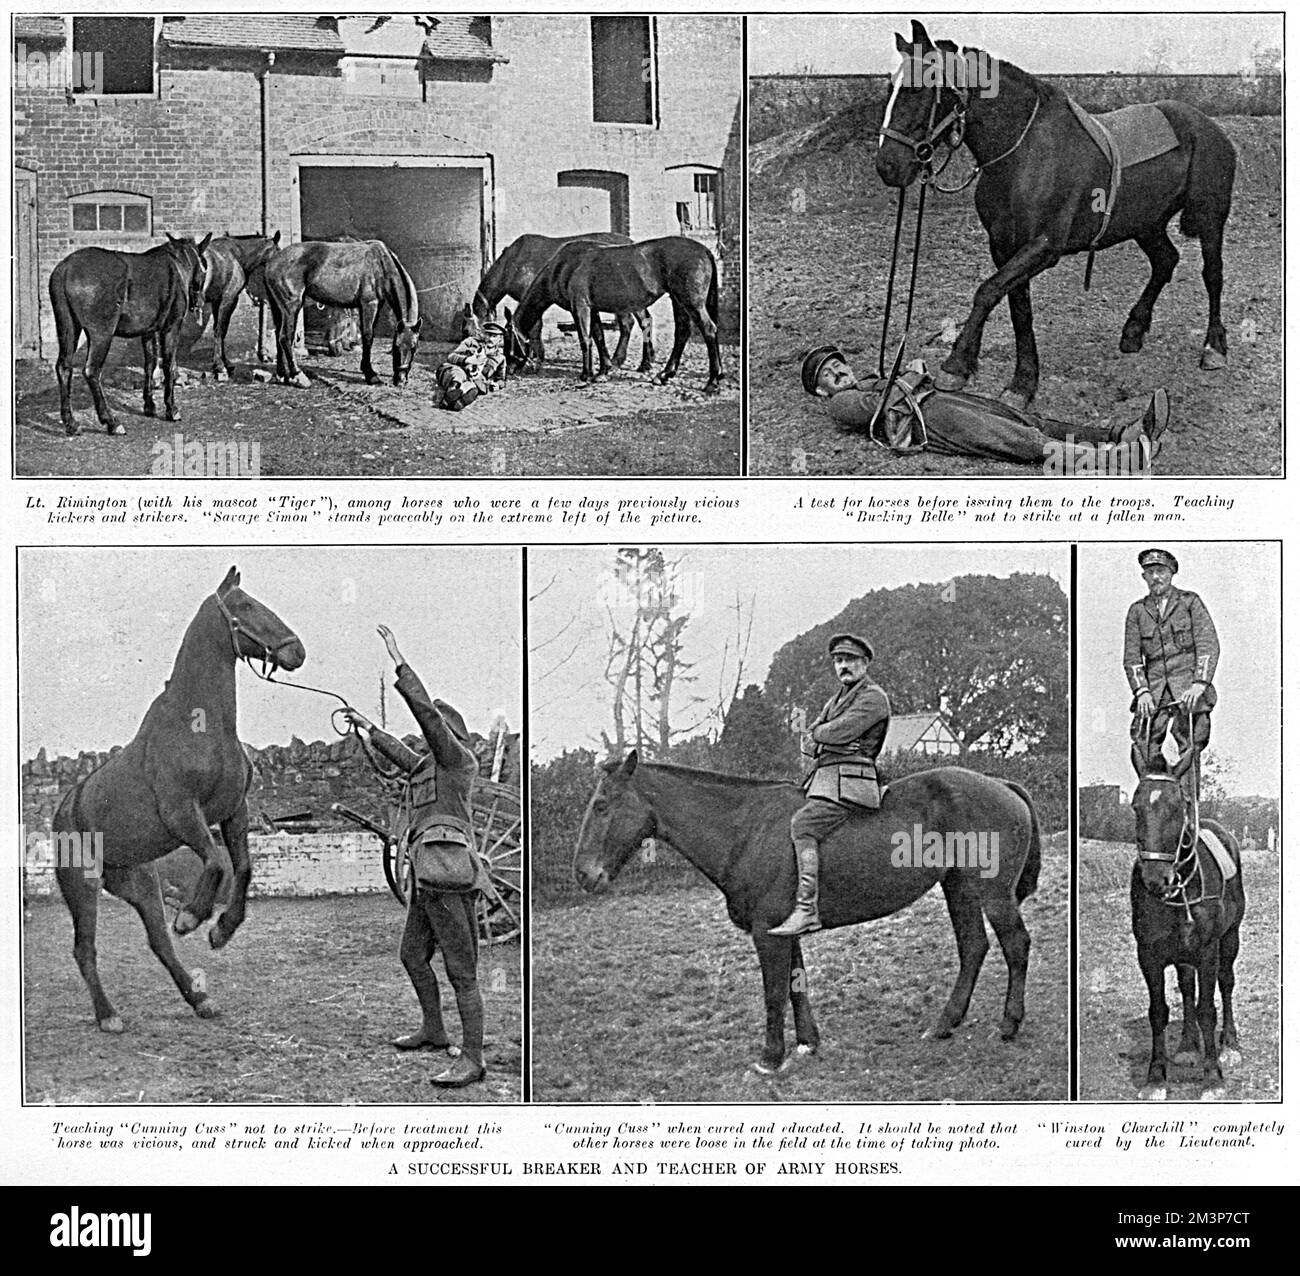 Lt. Mike Rimington, late of the 37th Lancers, seen breaking unruly and vicious horses for the British Army at the Underdale Hall Remount Department near Shrewsbury in 1916.  Rimington took on cases of the most unmanageable horses with great success.  The horses pictured here include, from top left clockwise, Savage Simon whose report from the War Office had described him as 'Vicious and quite unmanageable.  Has injured six men, some badly.  Savaged the rough rider and tore the saddle to pieces.' (Rimington is seen with his dog mascot, Tiger).  Top right photo shows Rimington demonstrating how Stock Photo